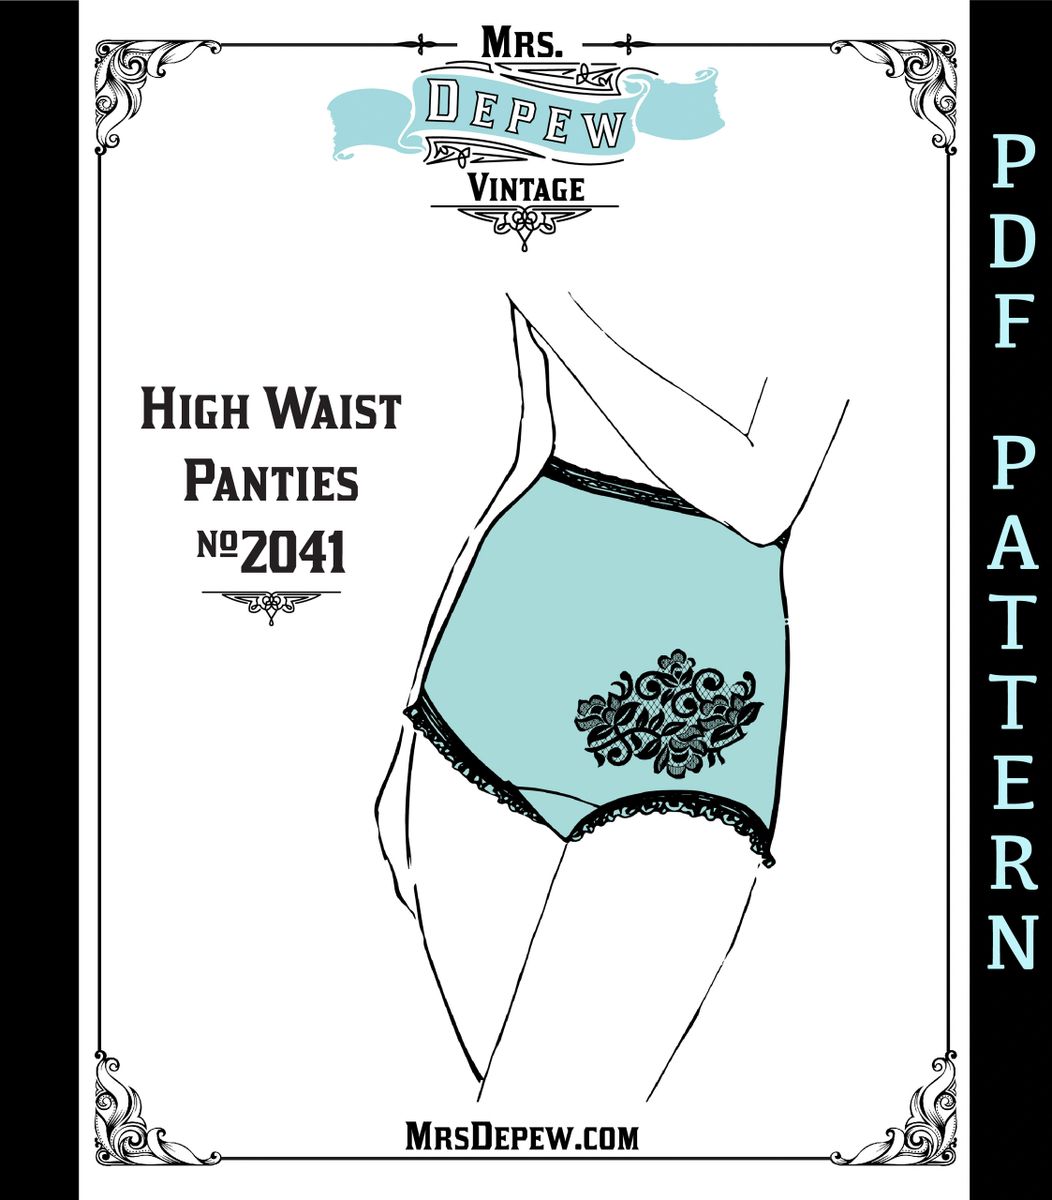 Vintage Style Shapewear Sewing Pattern High Waist Panties #2041 sizes 4-16  -INSTANT DOWNLOAD